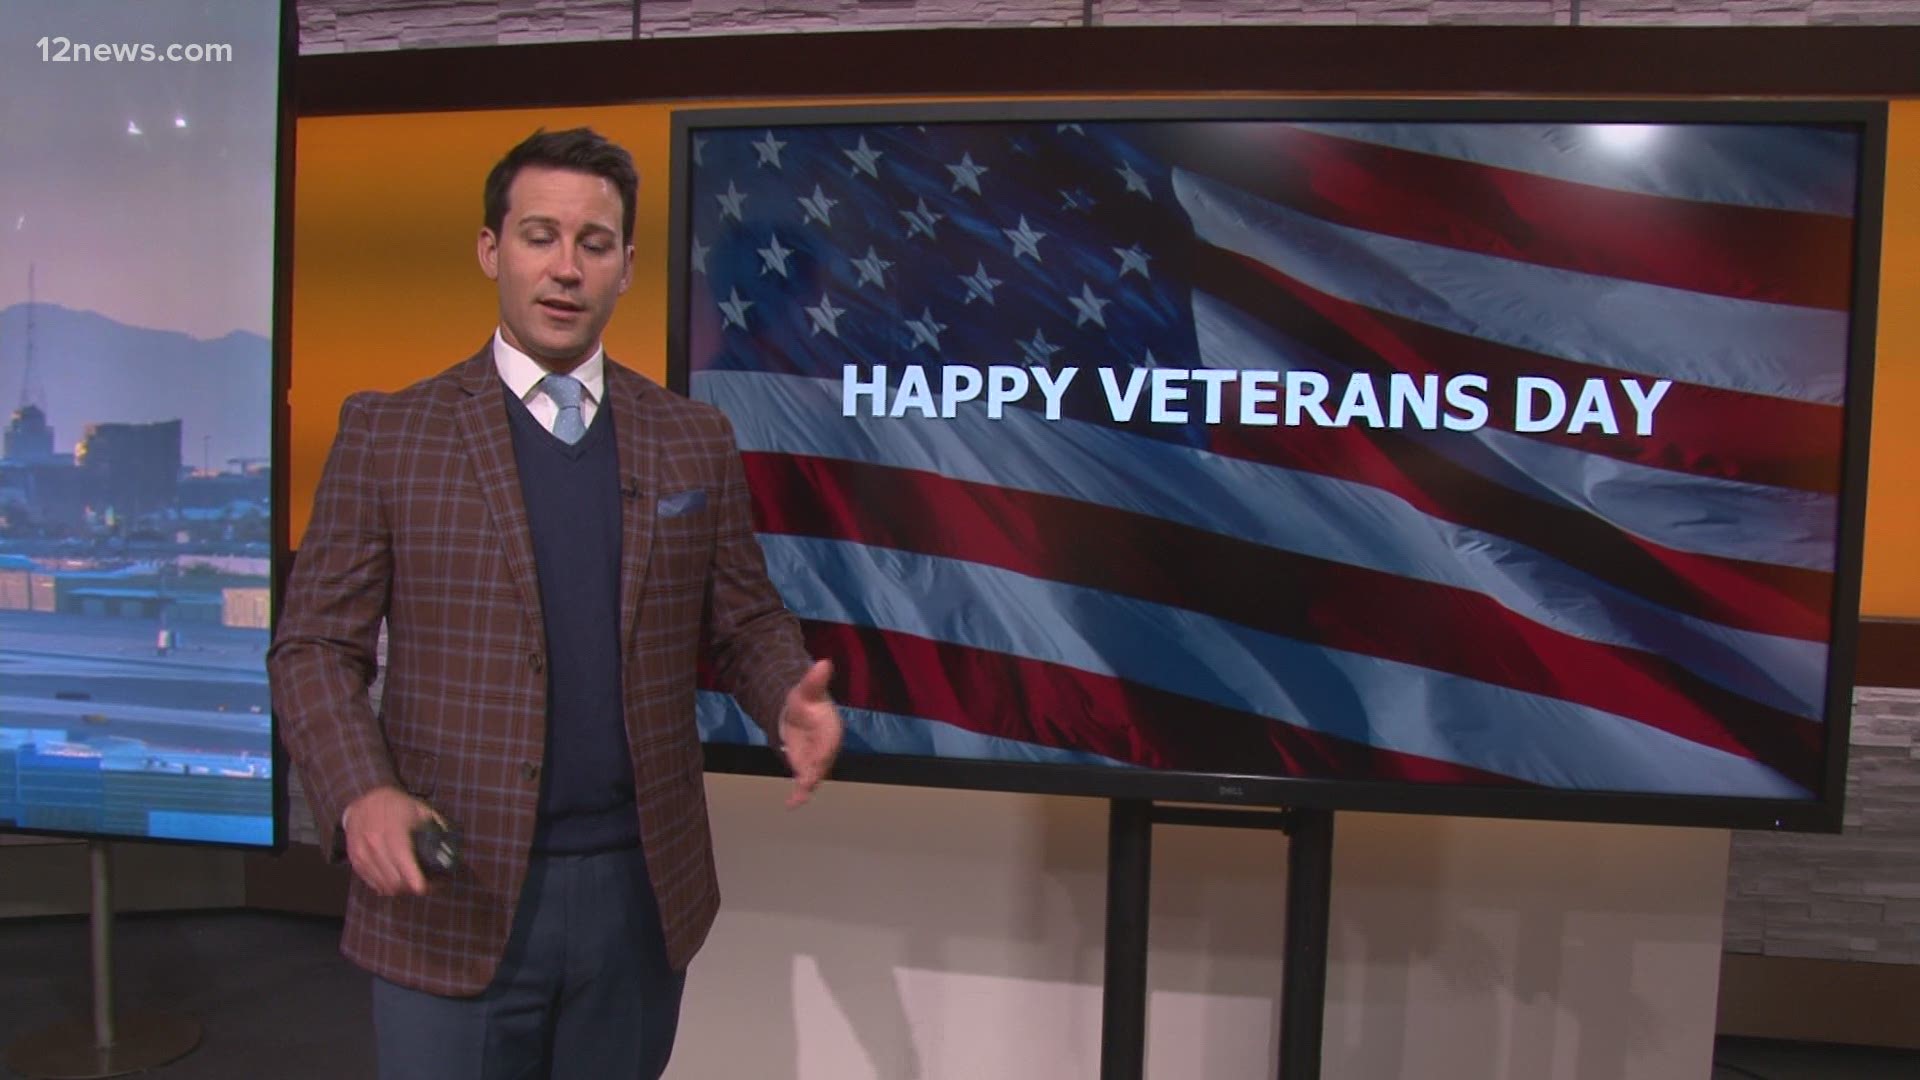 Today, we take a moment to honor those who served on Veterans Day. Ryan Cody has more.